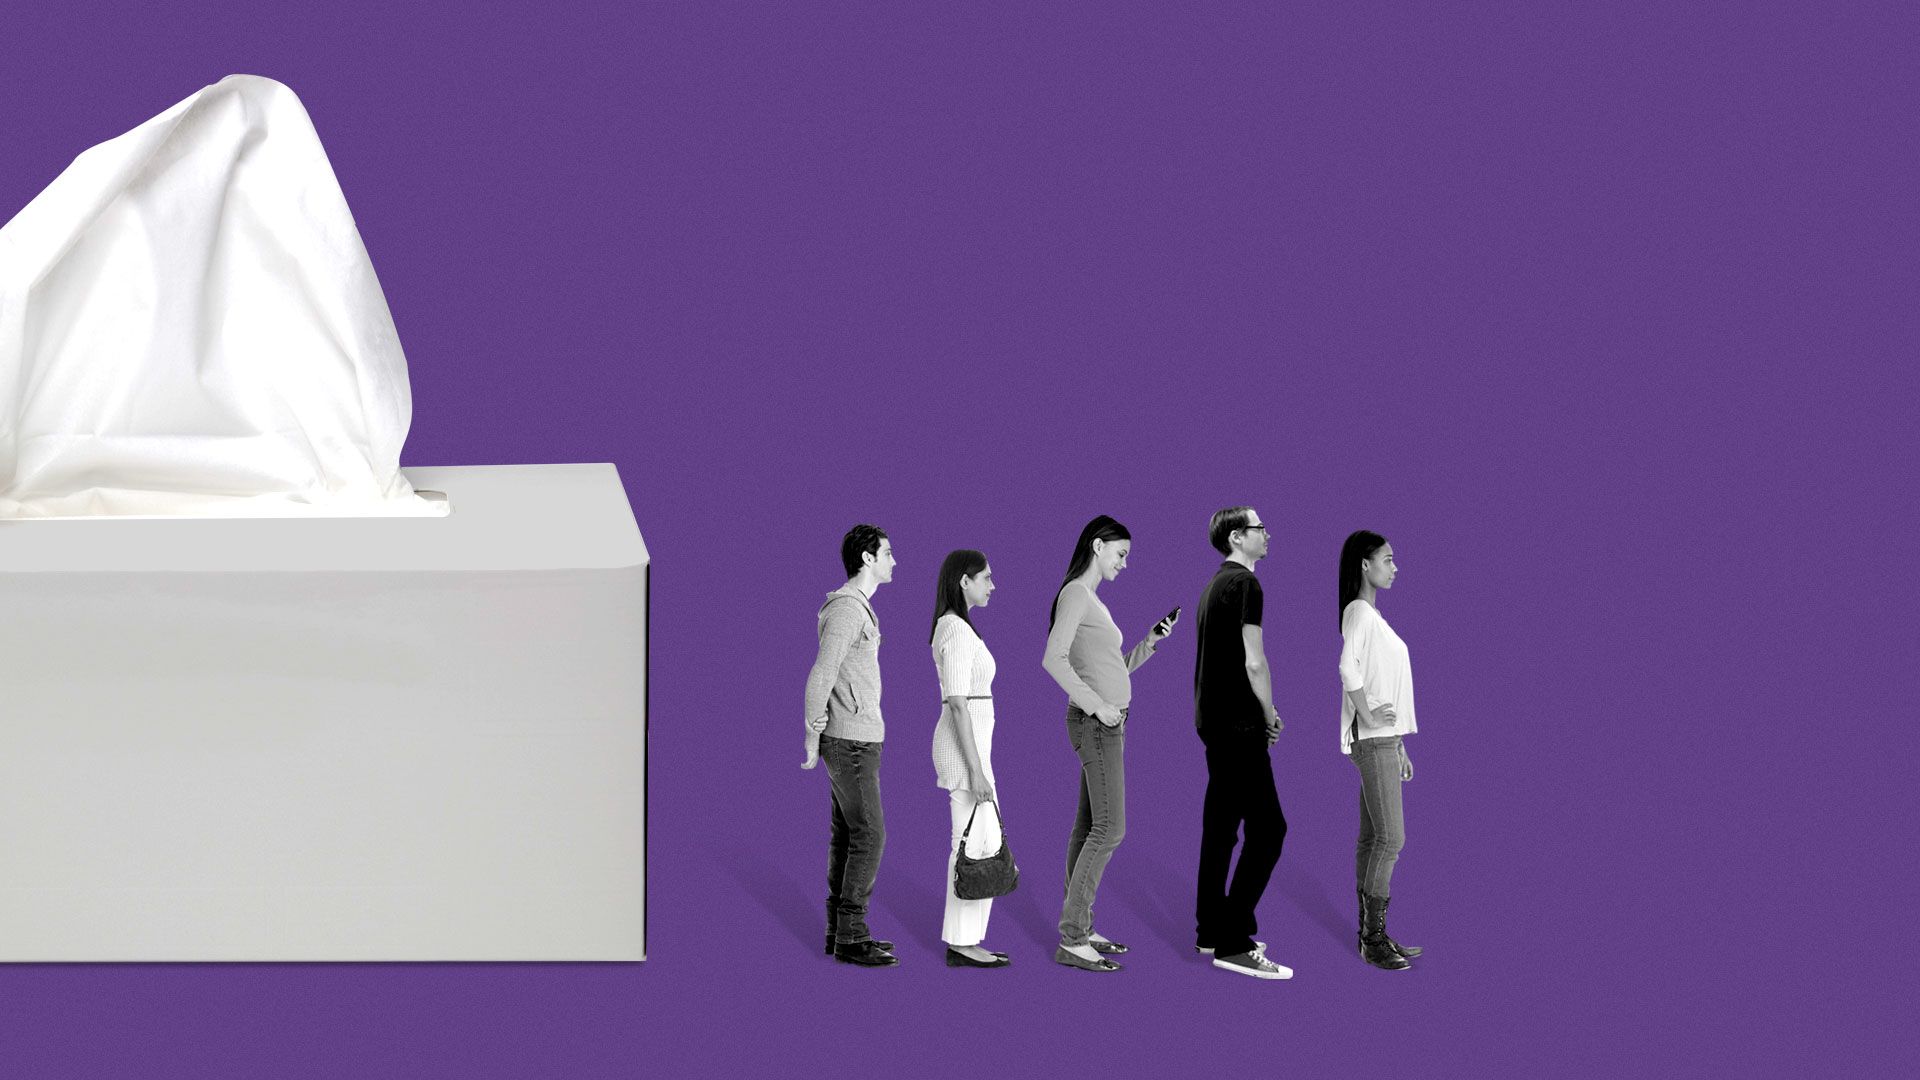 Illustration of group of people looking down and facing away from large tissue box.